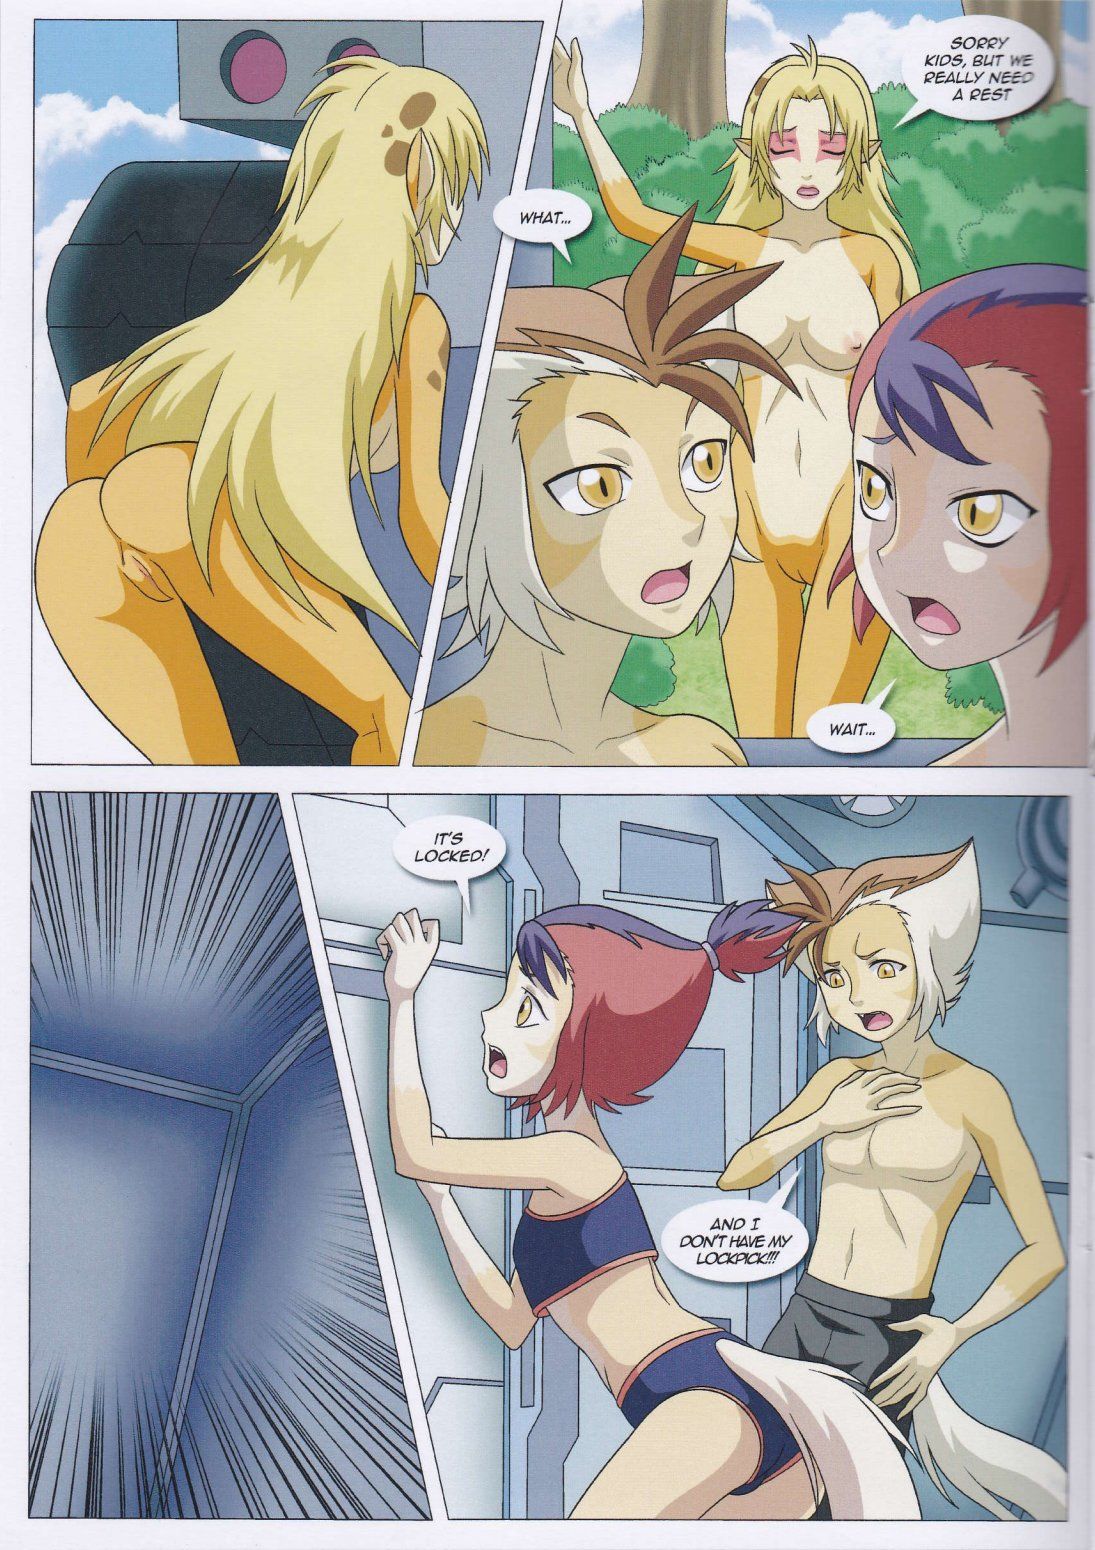 Thundercats - Break Time - Furry Sex page 7